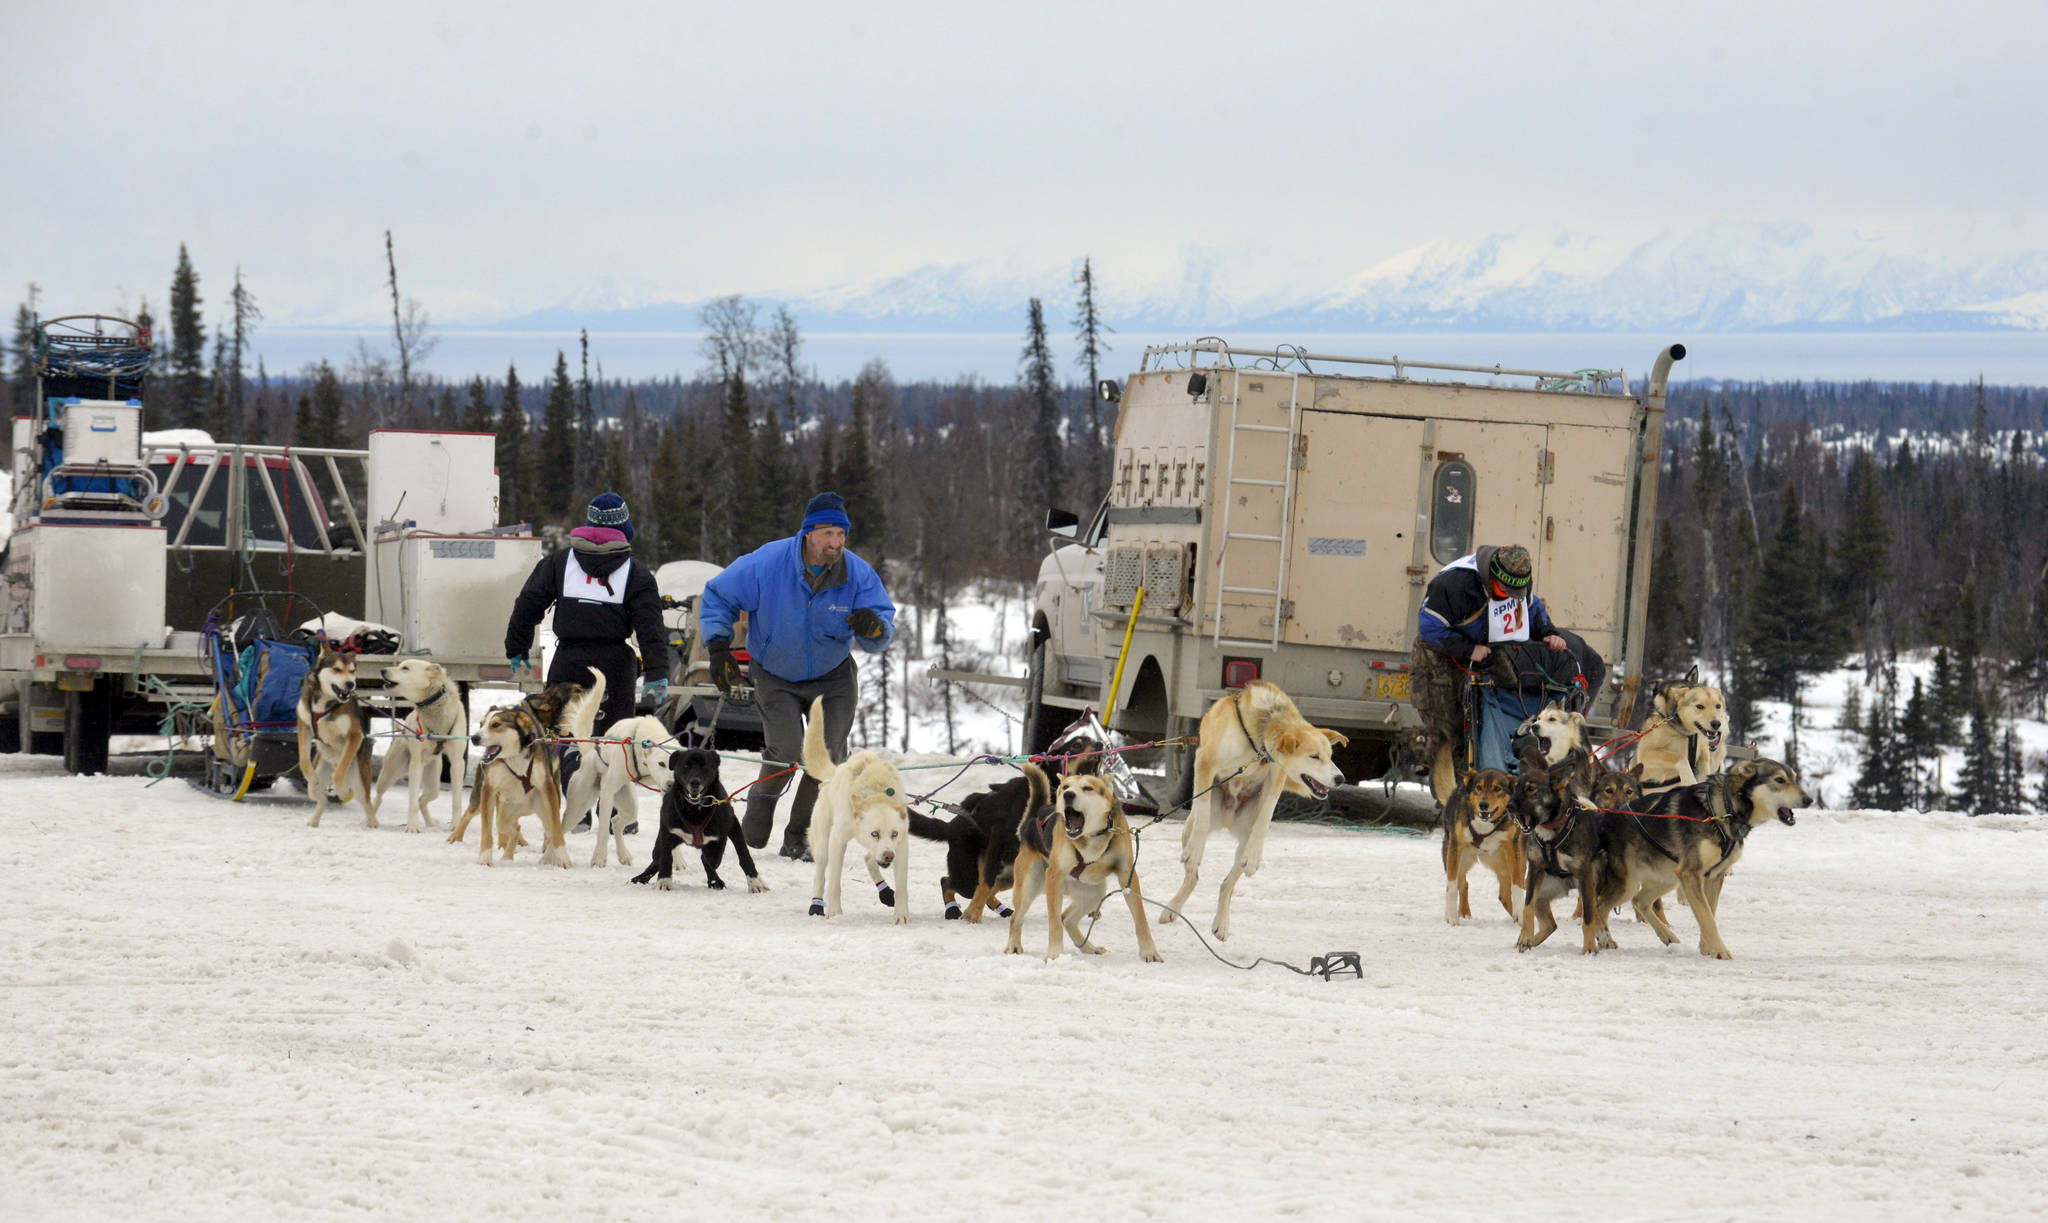 Two teams race to hook up their dogs after the shotgun start at Freddie’s Midnight Run in Caribou Hills on Saturday, April 1. (Kat Sorensen/Peninsula Clarion)